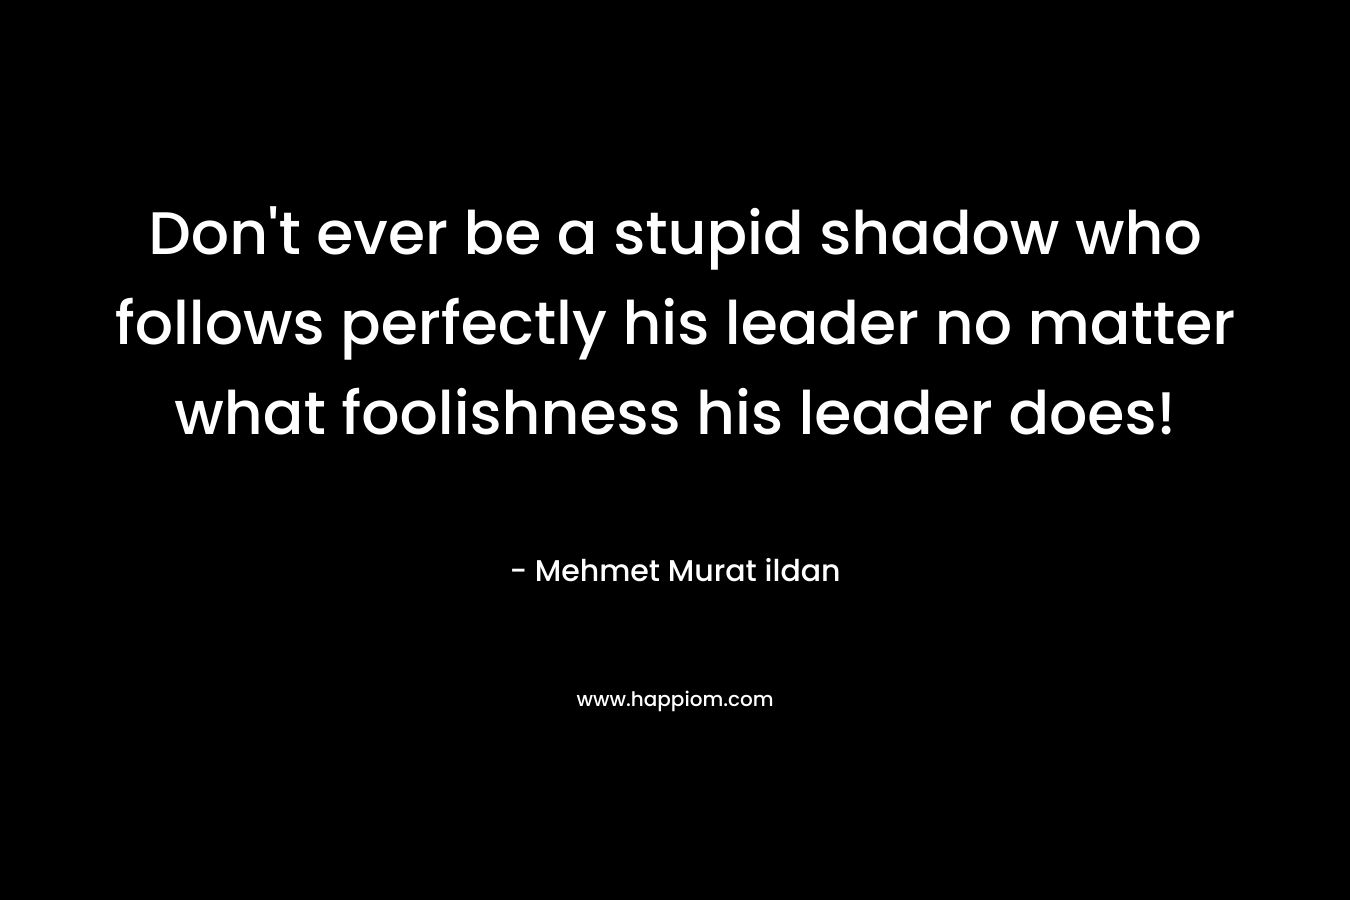 Don’t ever be a stupid shadow who follows perfectly his leader no matter what foolishness his leader does! – Mehmet Murat ildan